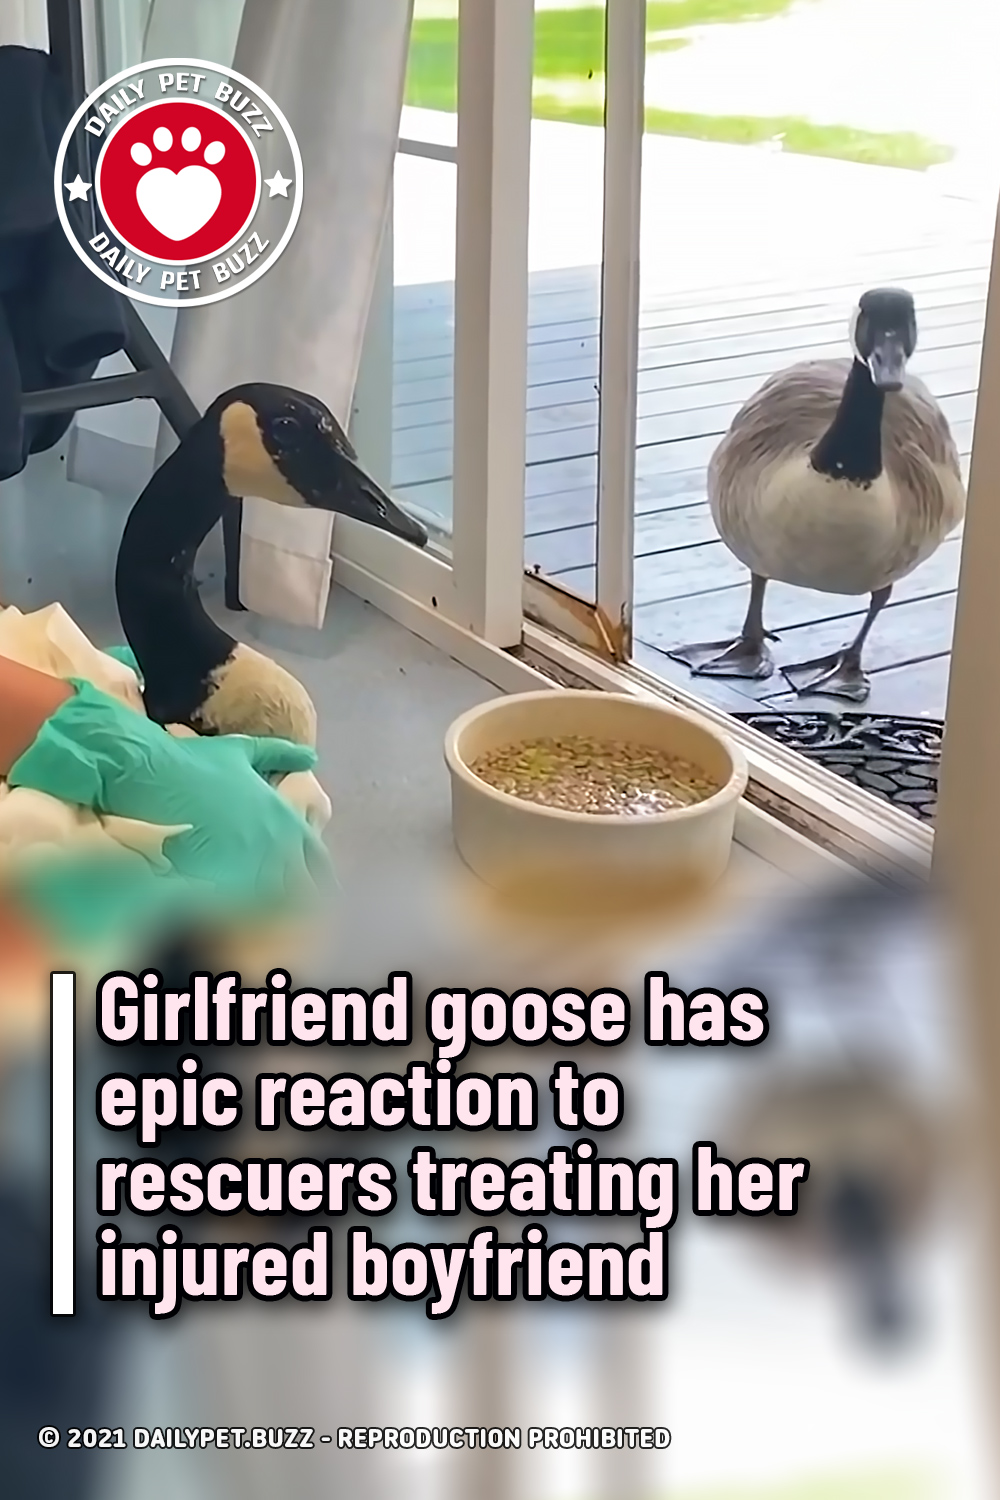 Girlfriend goose has epic reaction to rescuers treating her injured boyfriend